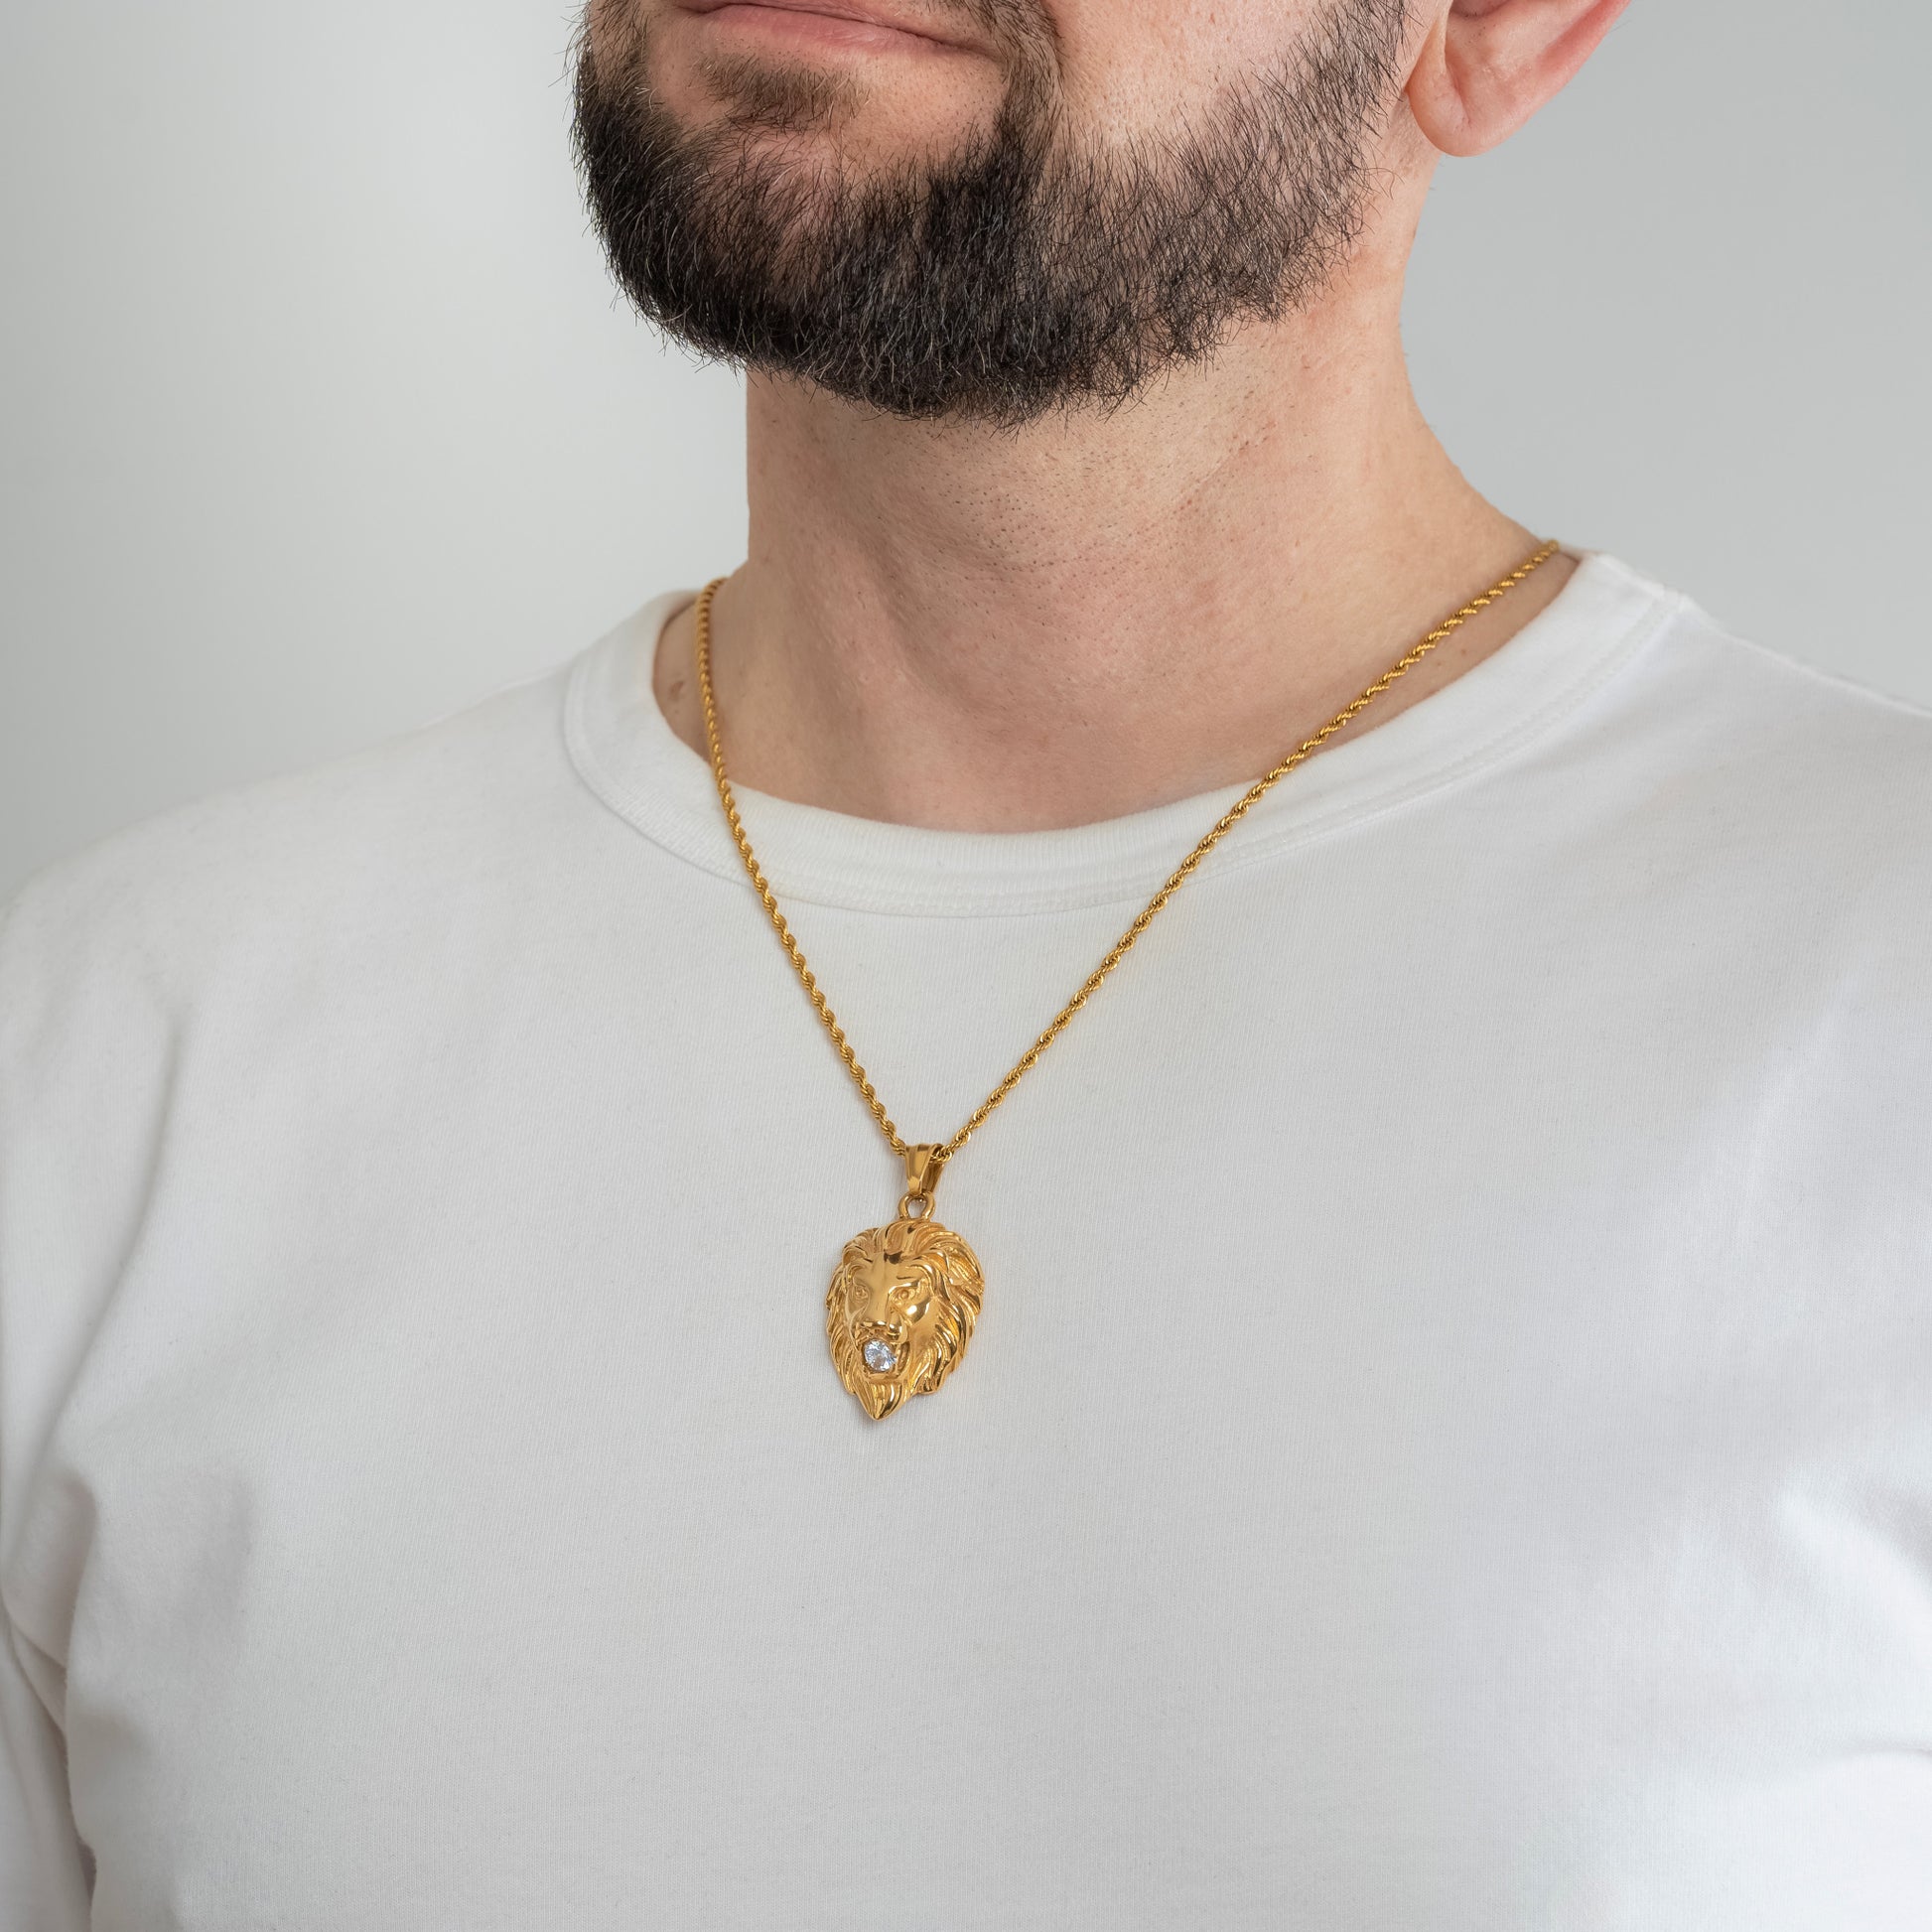 A male model in a white t-shirt wearing a Lion Head Crystal Gold Pendant with a Gold Rope chain 22 inches.